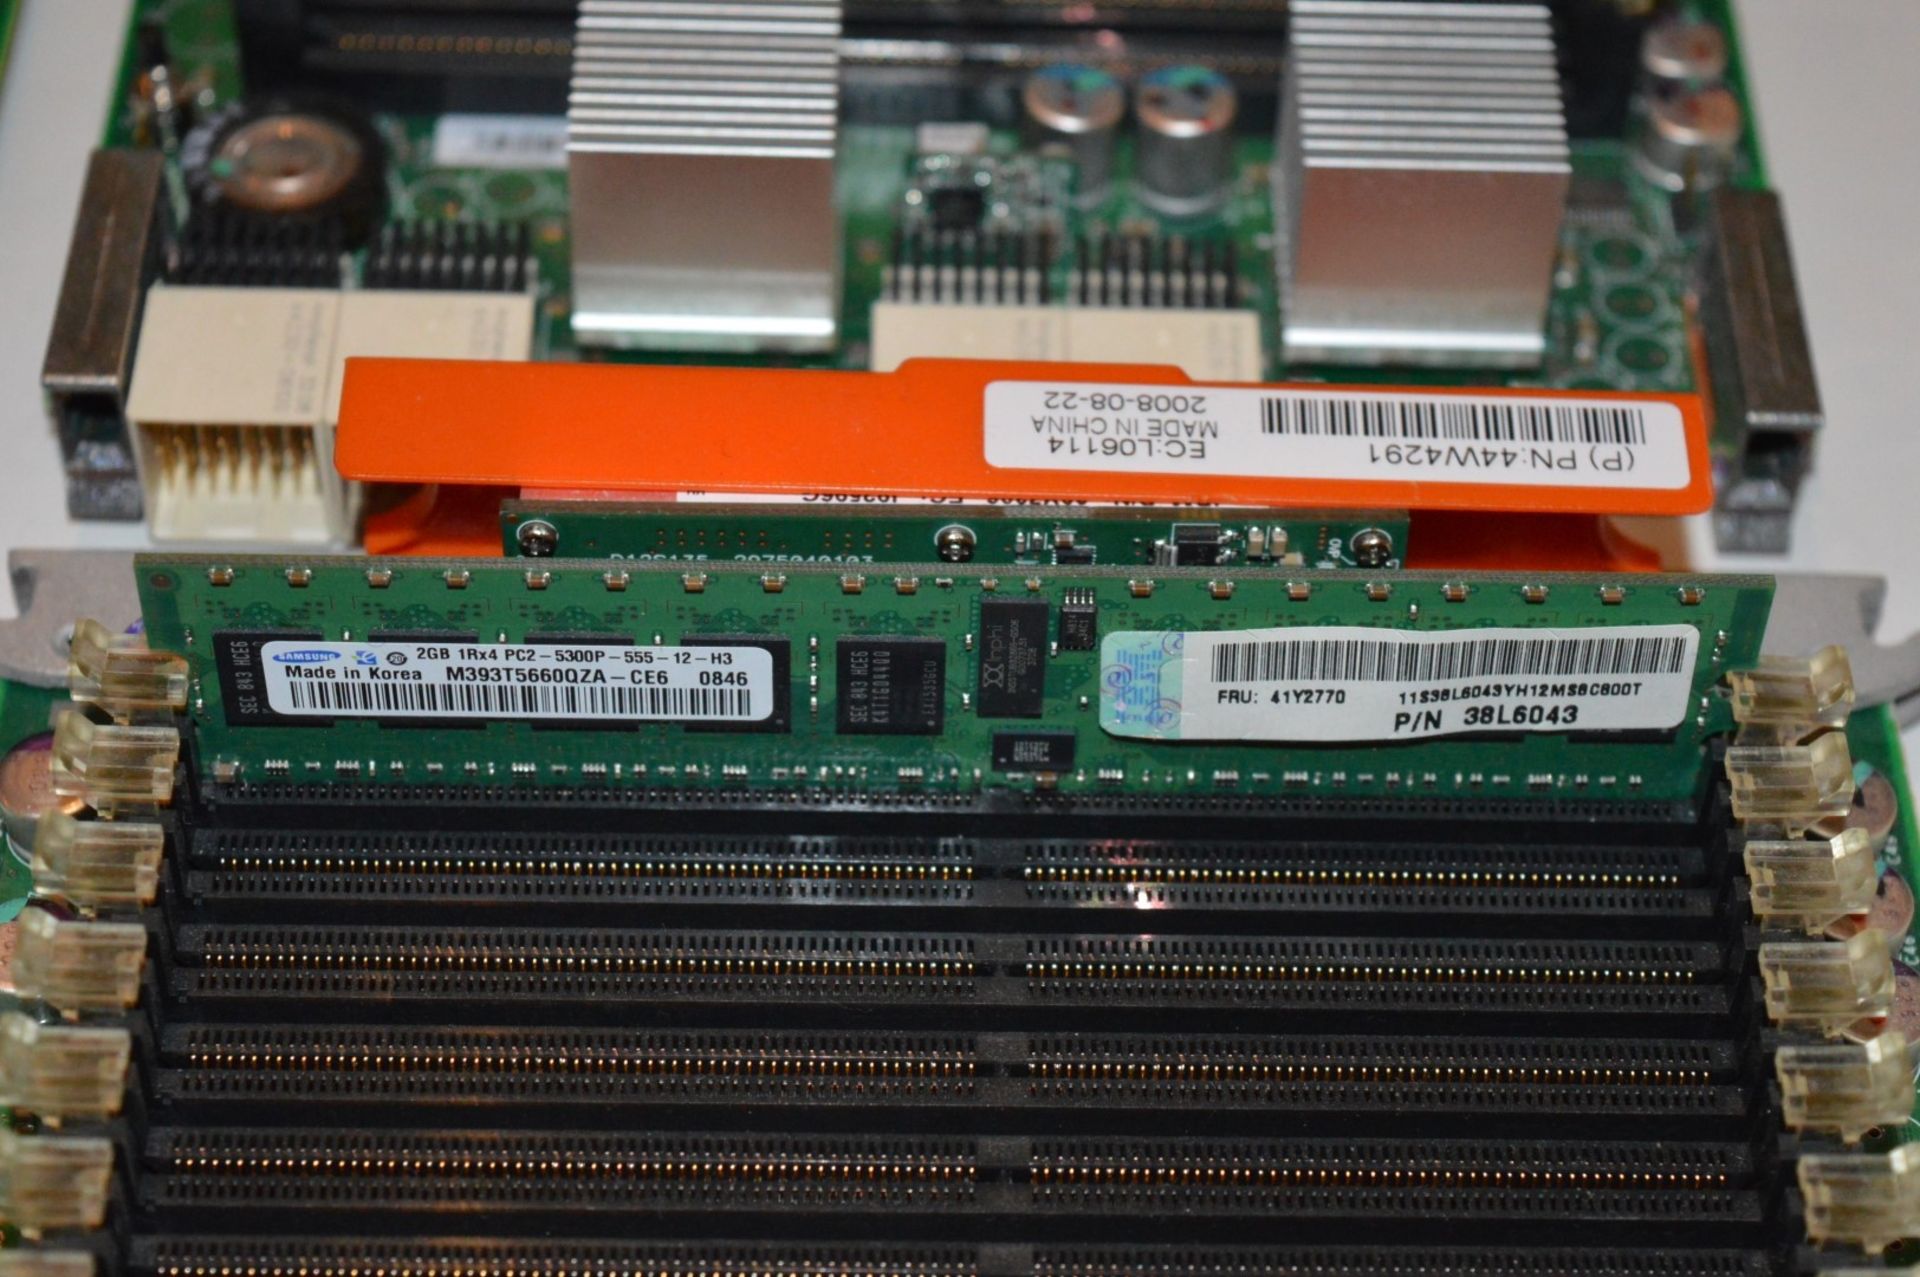 4 x IBM 44W4291 Memory Expansion Cards For X3850 M2 Servers - Each Card Includes 2gb System Ram - - Image 2 of 5